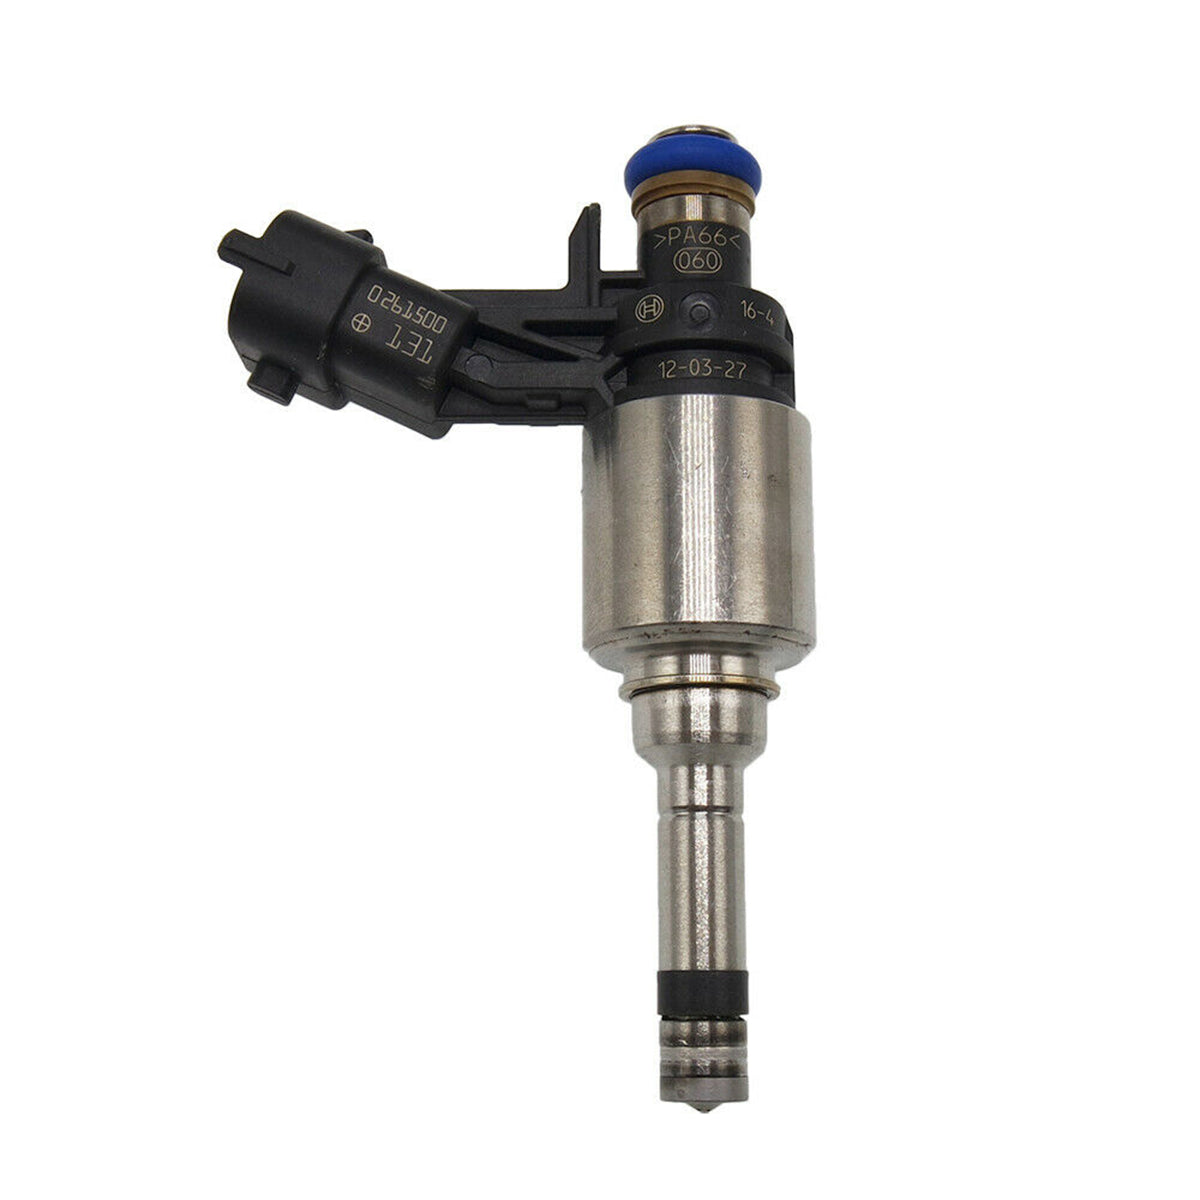 Fuel Injector For 2012-2017 Buick Enclave Chevy Traverse GMC Acadia, Fuel Injector 12663380, Car Fuel Injector, Daysyore Fuel Injector